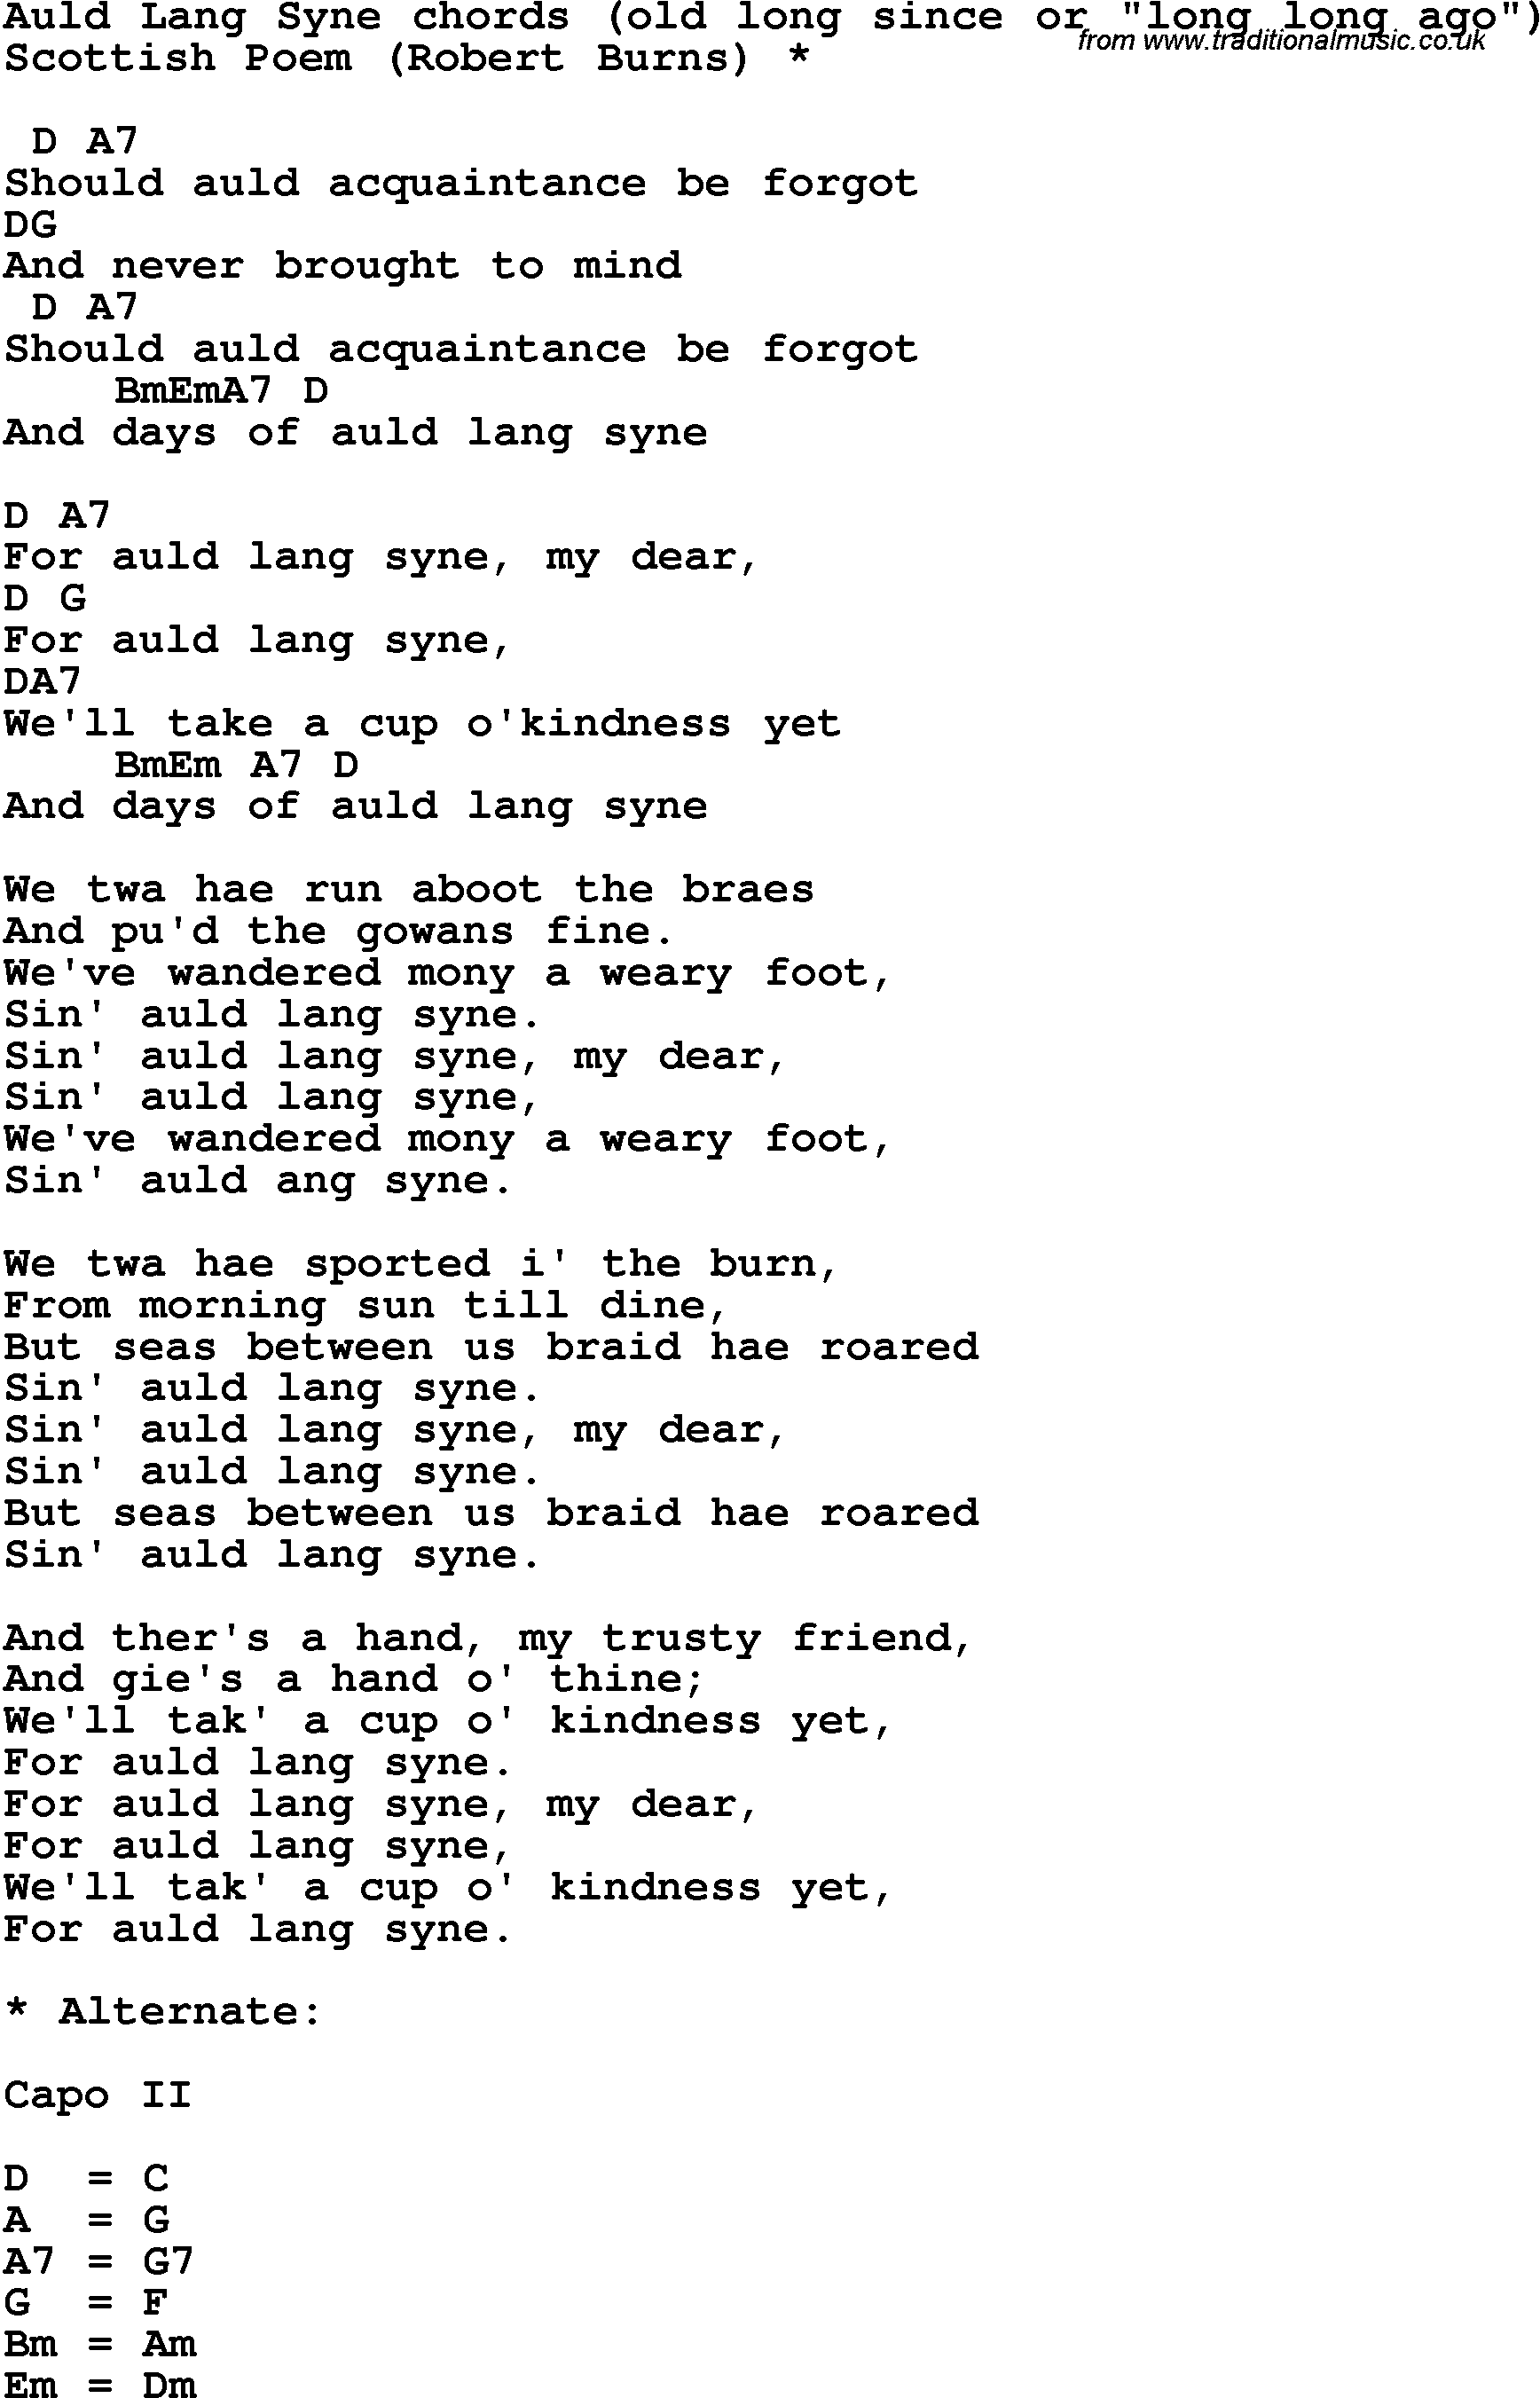 Song Lyrics with guitar chords for Auld Lang Syne